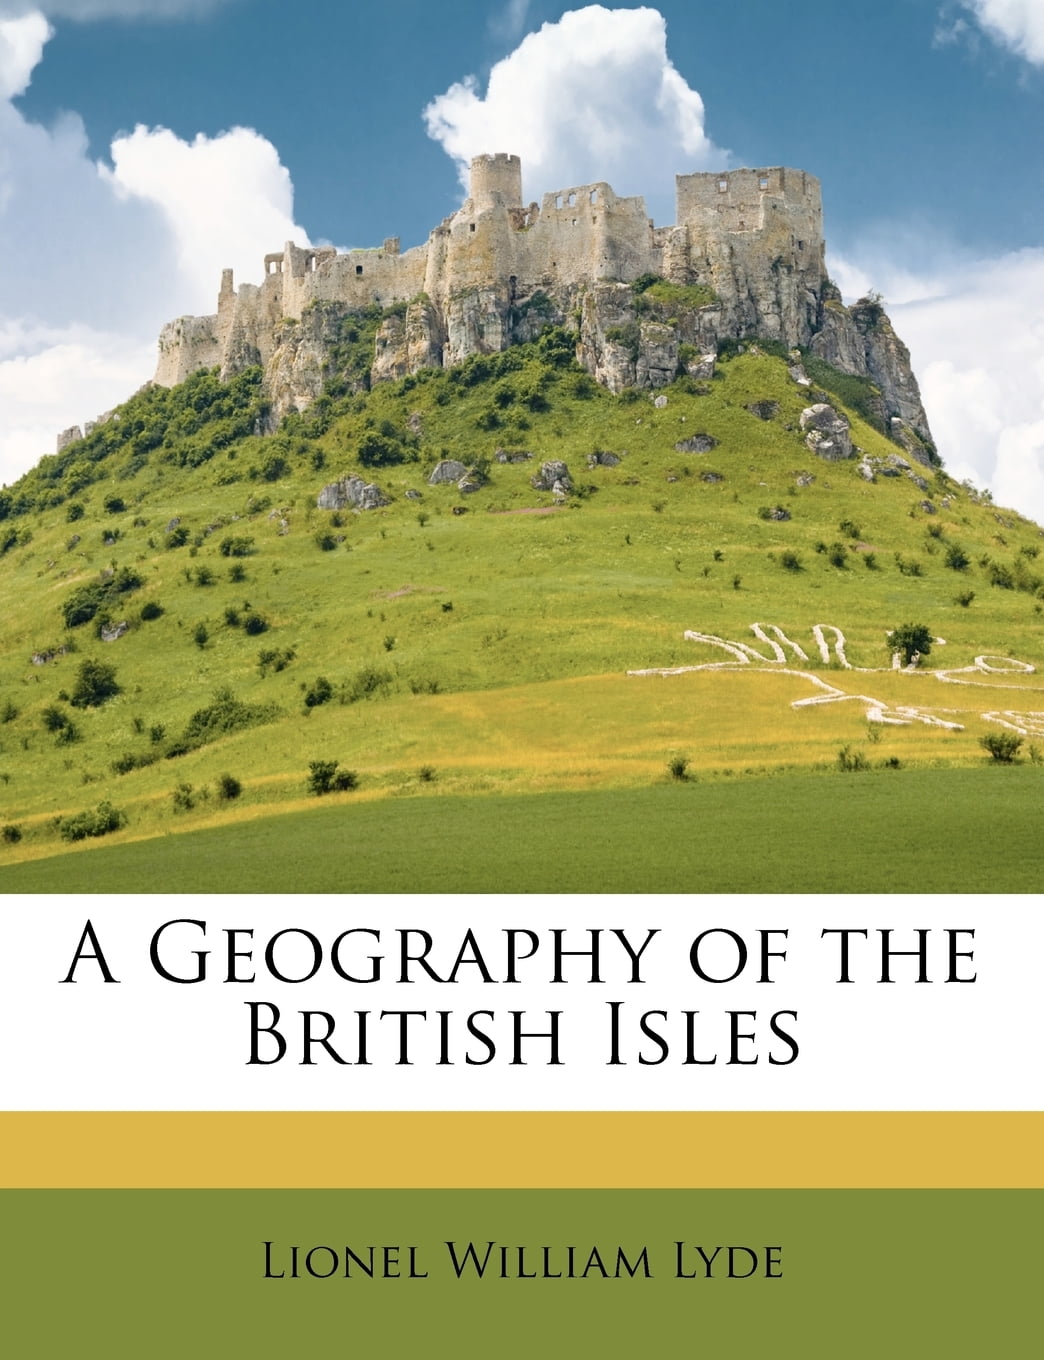 A Geography of the British Isles - Walmart.com